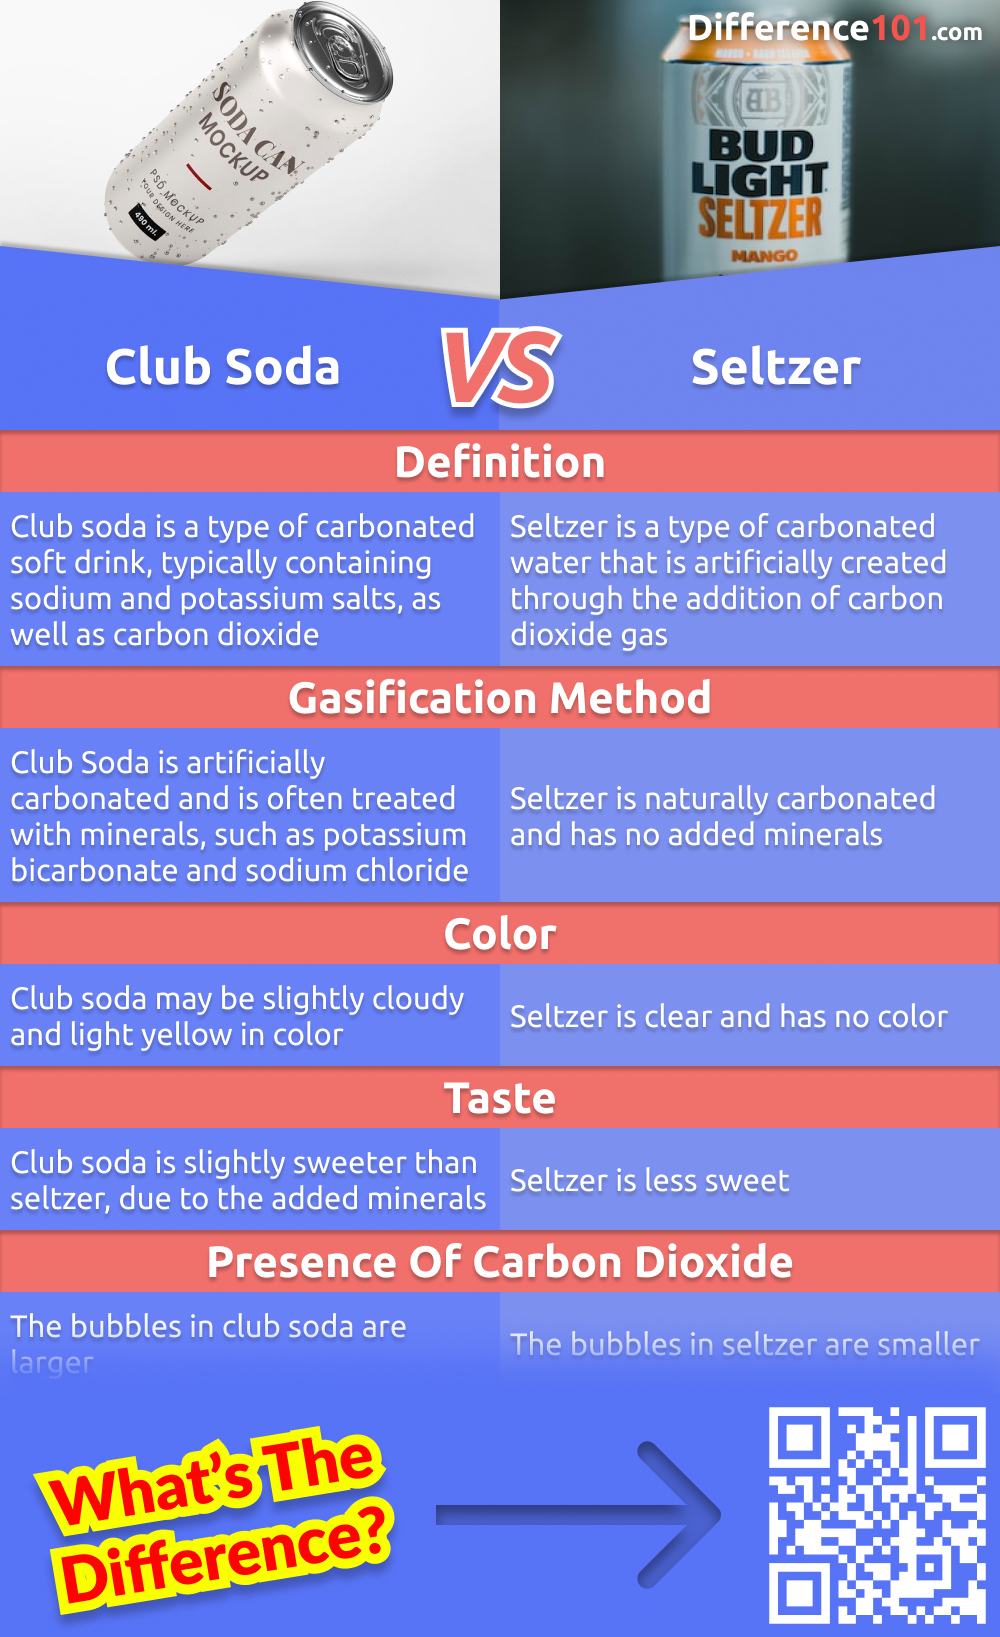 What's the difference between club soda and seltzer? Both are types of carbonated water, but there are some differences. We'll explore the pros and cons of each to help you decide which is right for you.